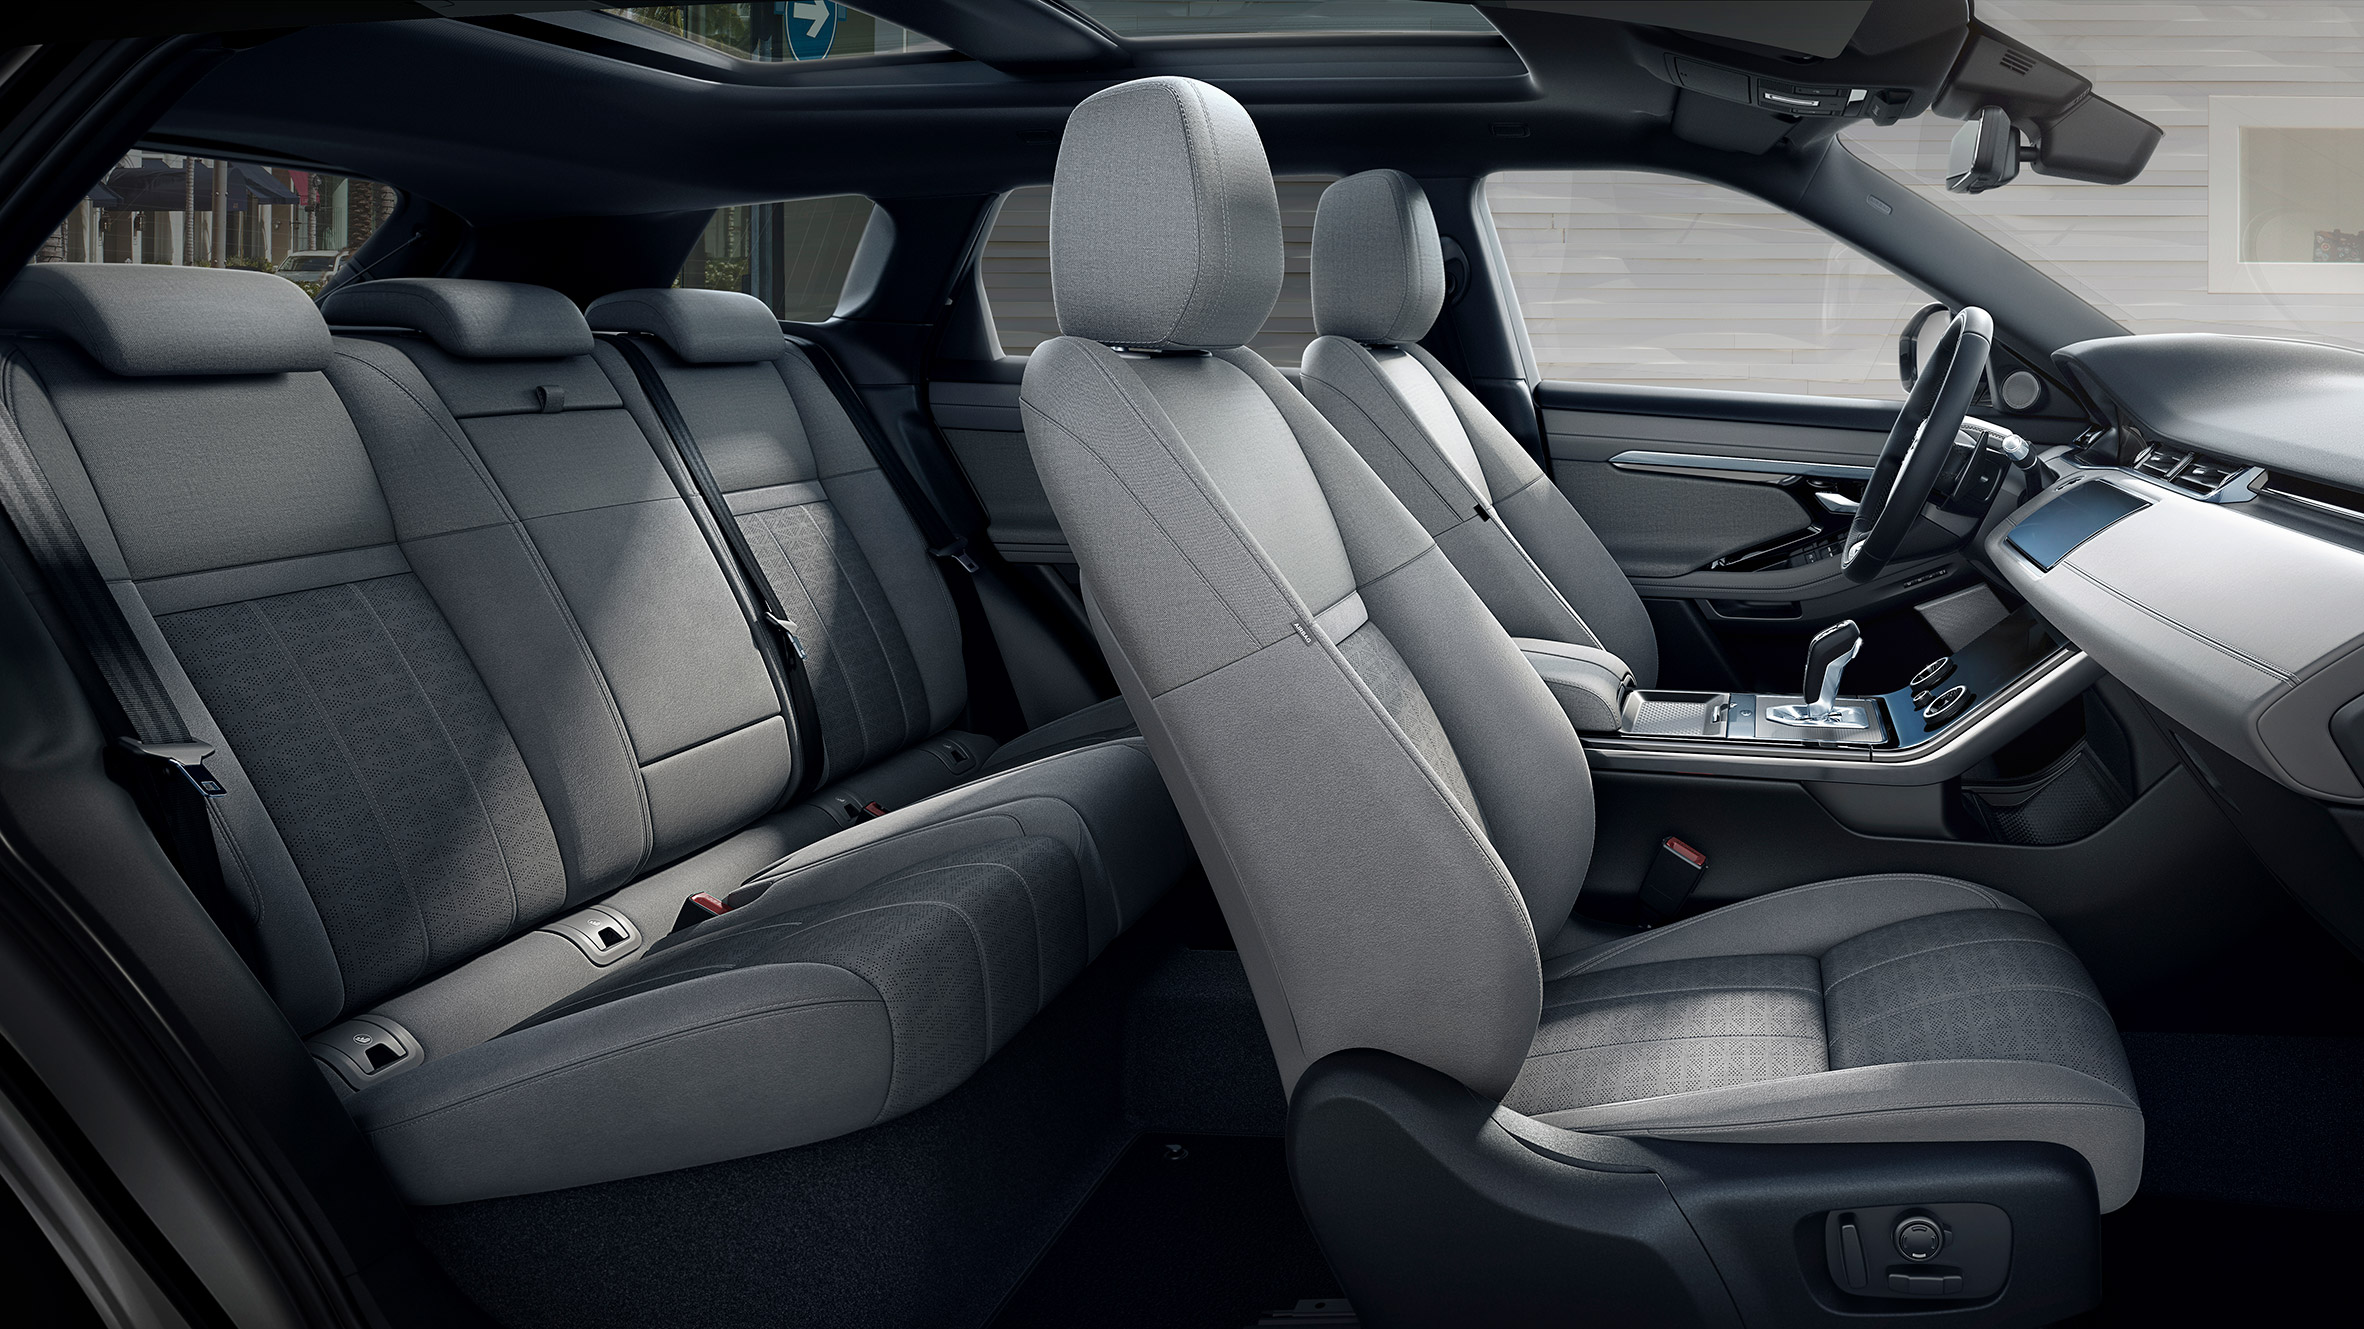 New Range Rover Evoque featuring Kvadrat wool-blend upholstery